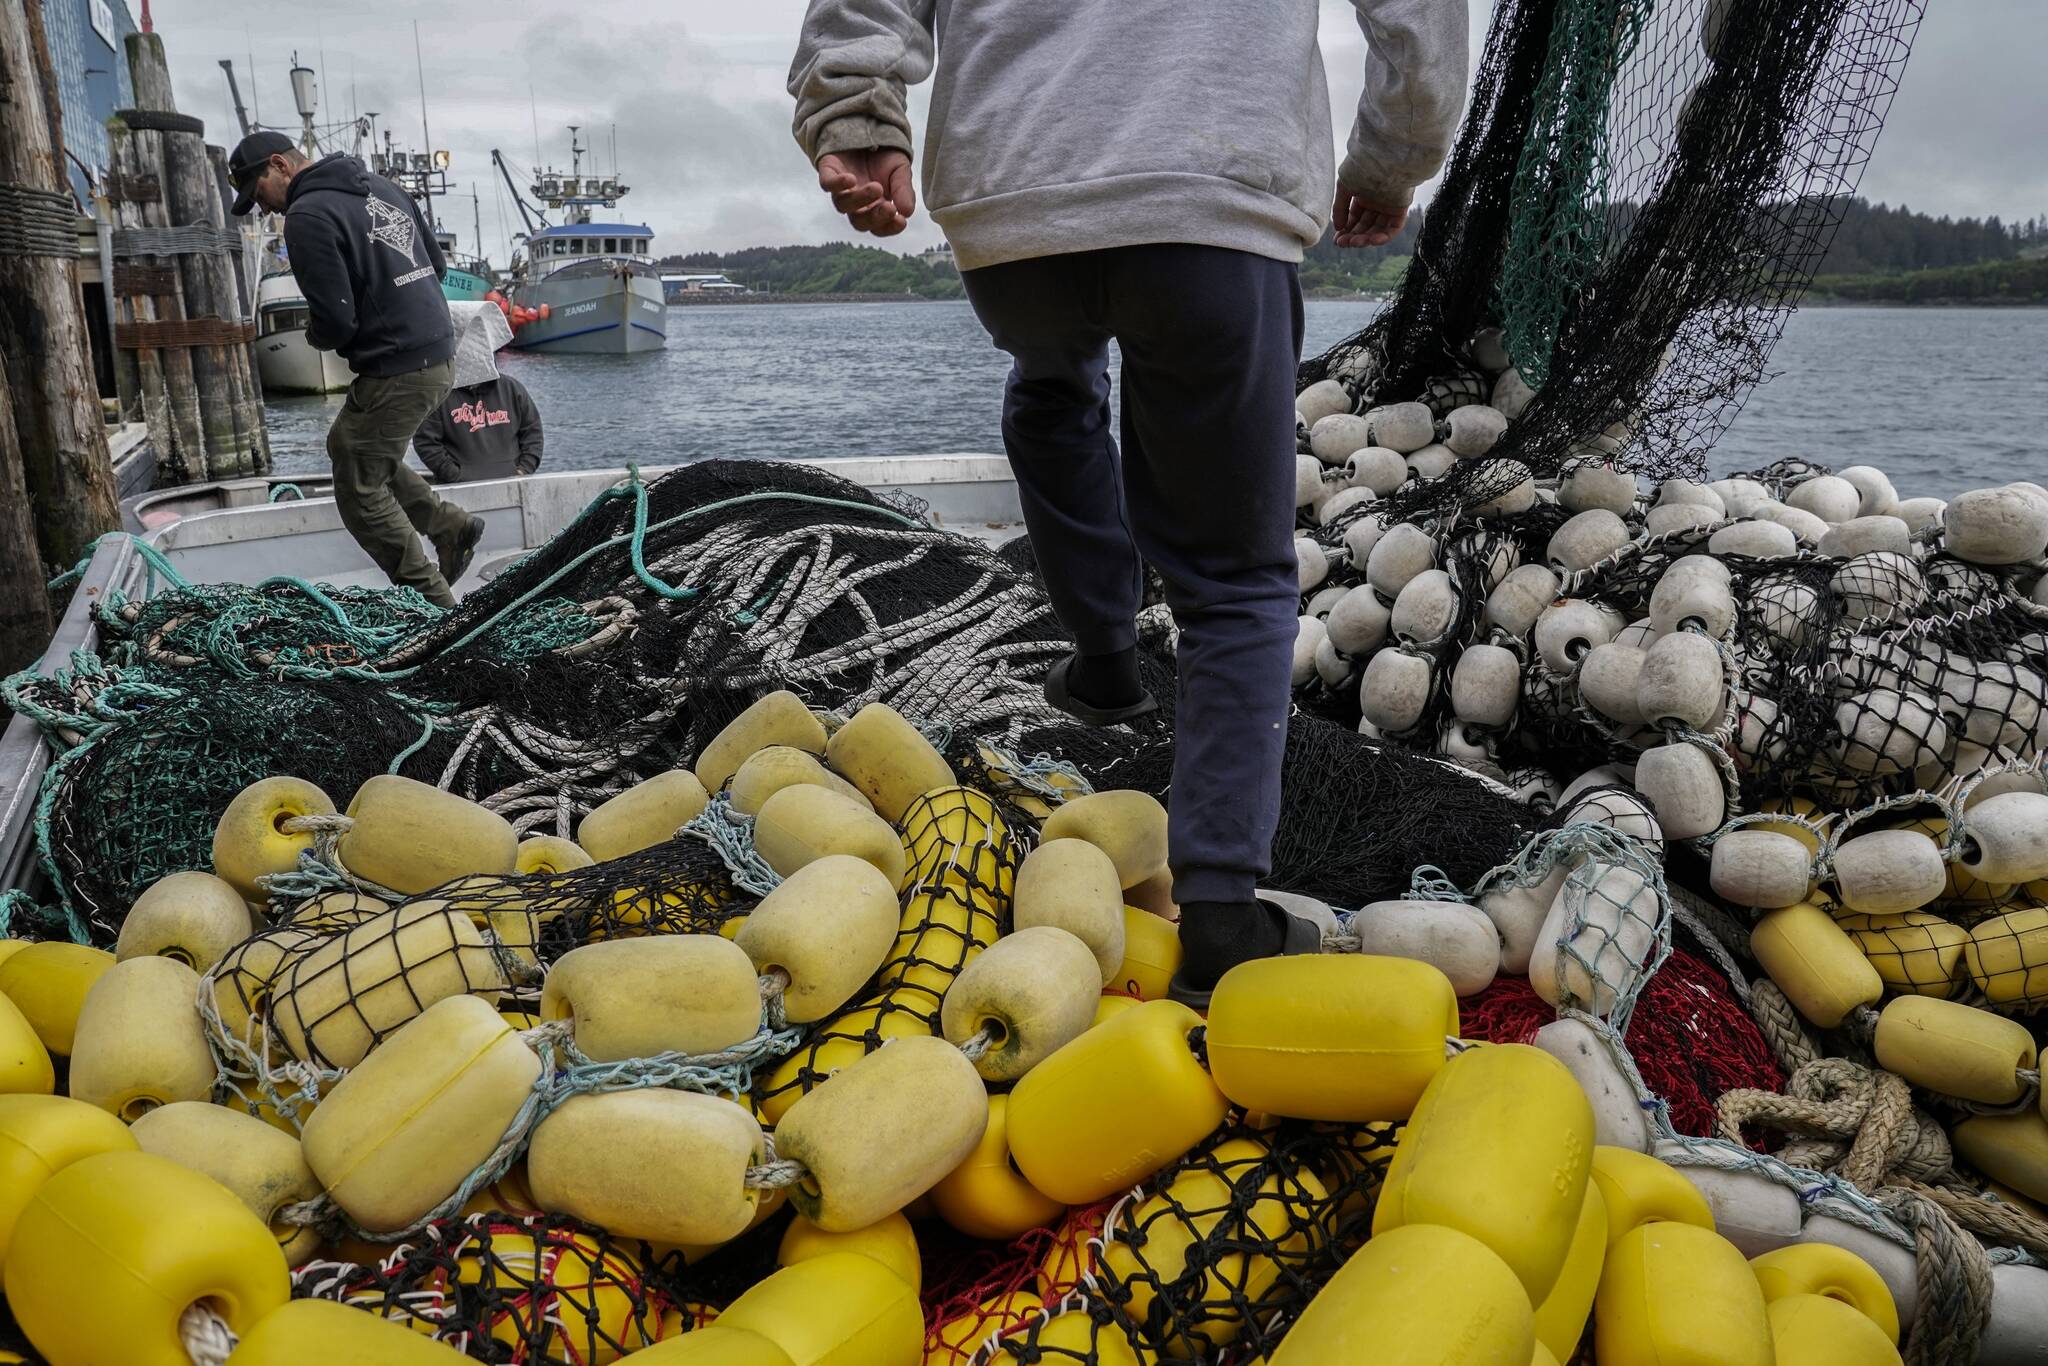 Darren Platt, left, captain of the Agnes Sabine, and first-year deckhand Juan Zuniga, right, step over nets as they dock the boat for refueling, Friday, June 23, 2023, in Kodiak, Alaska. Retaining deckhands is key for Platt and he says he focuses on keeping crew members as comfortable as possible so that they might return again to work the following season while teaching them the skills they need to perform their job on the boat. (AP Photo/Joshua A. Bickel)